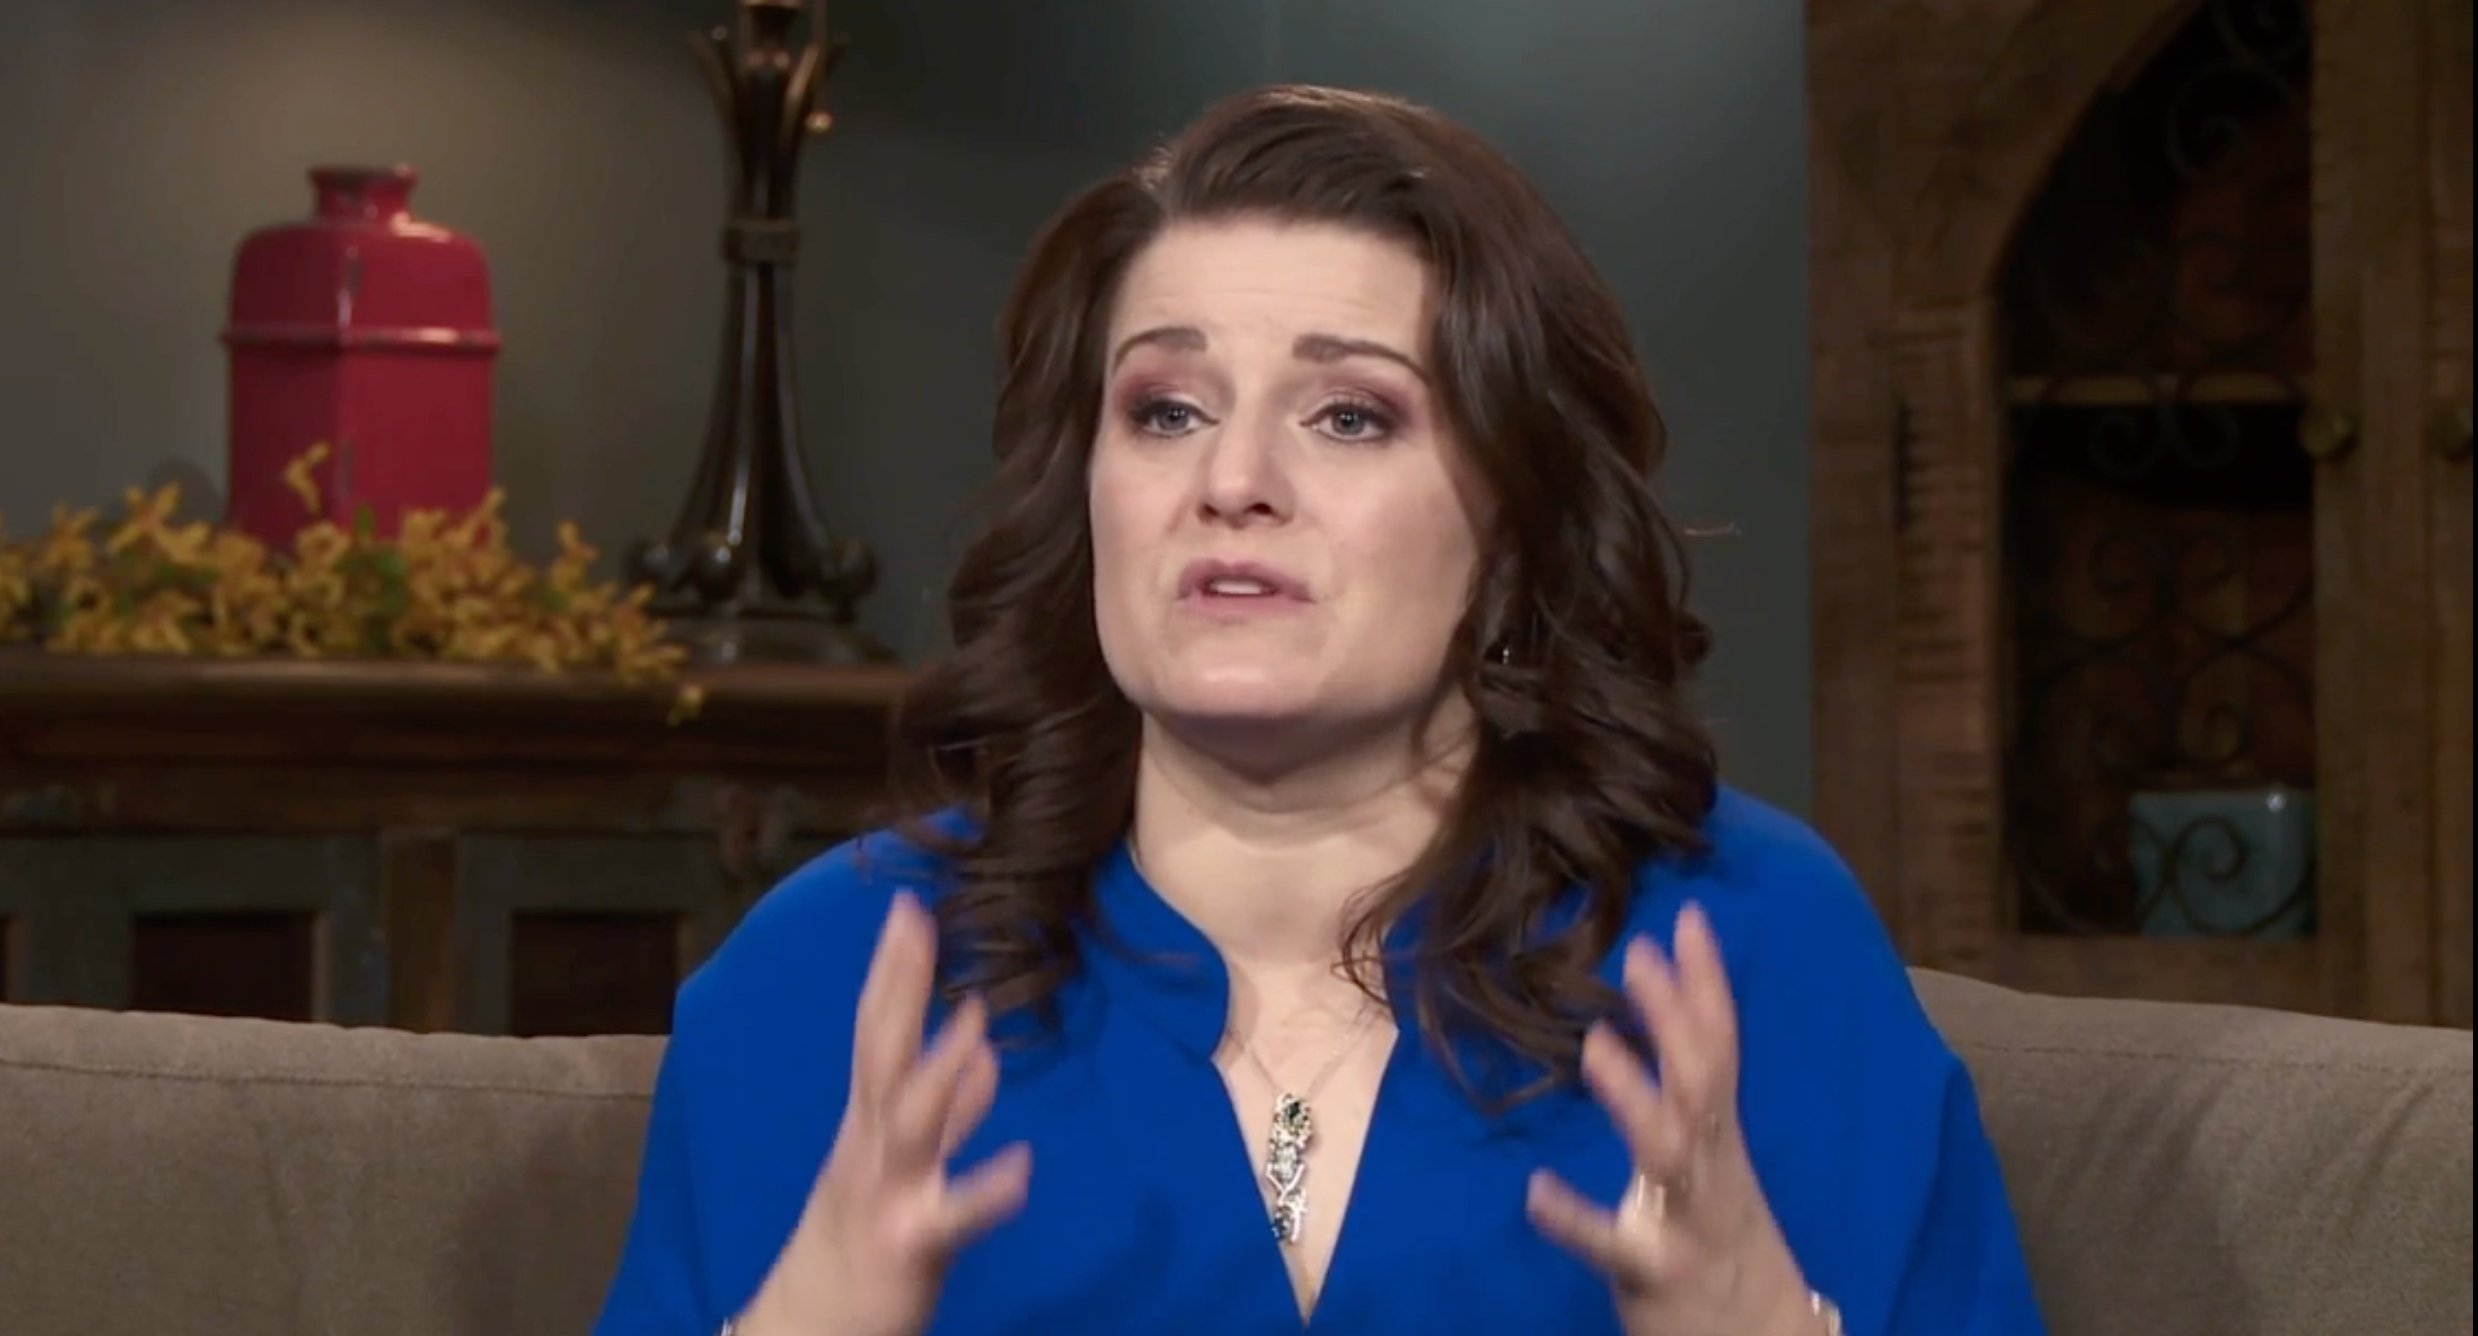 Robyn Brown looking frustrated during a confessional on 'Sister Wives' Season 16 on TLC